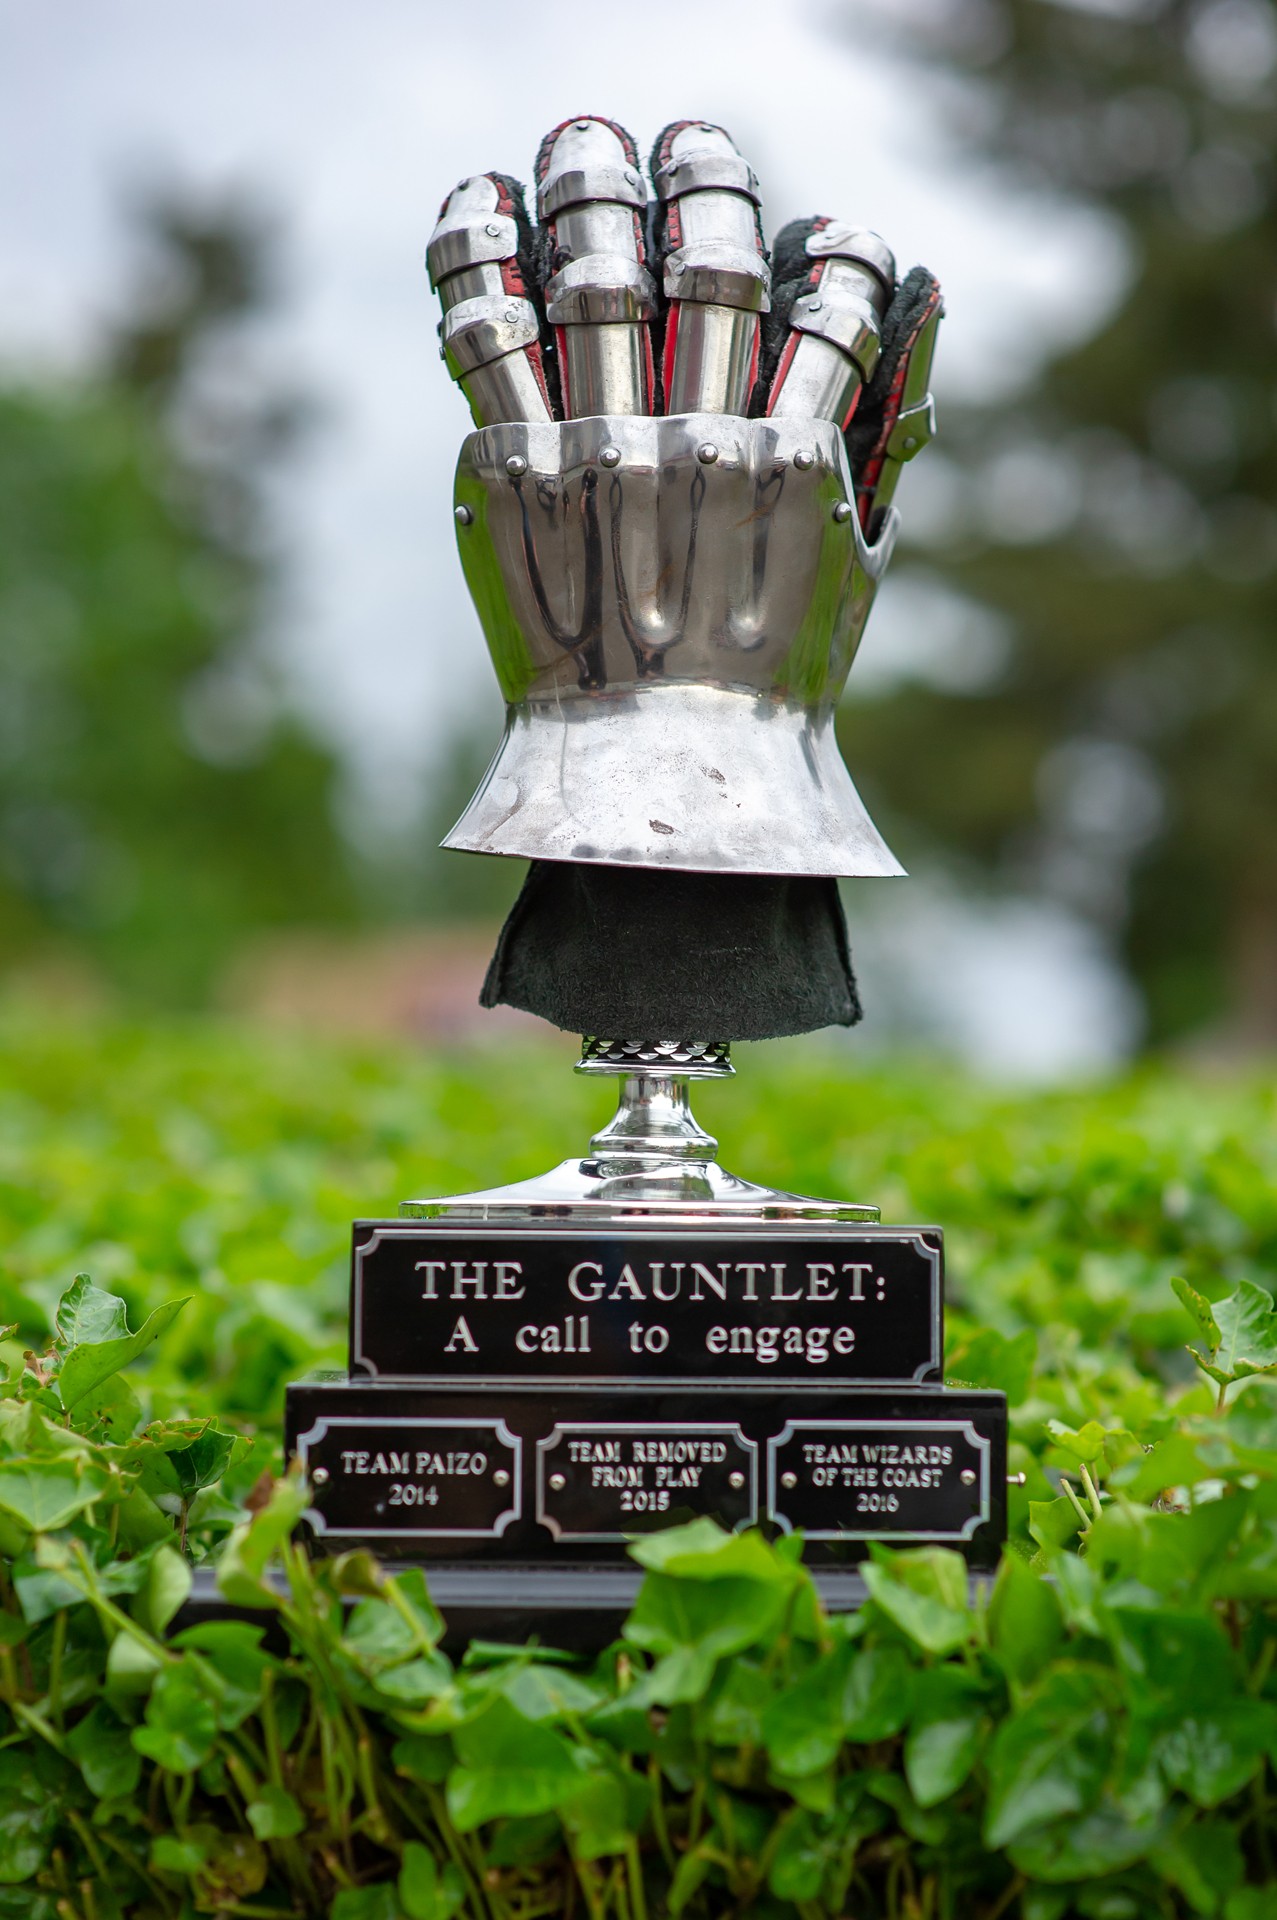 Picture of the Gauntlet trophy in a leafy background